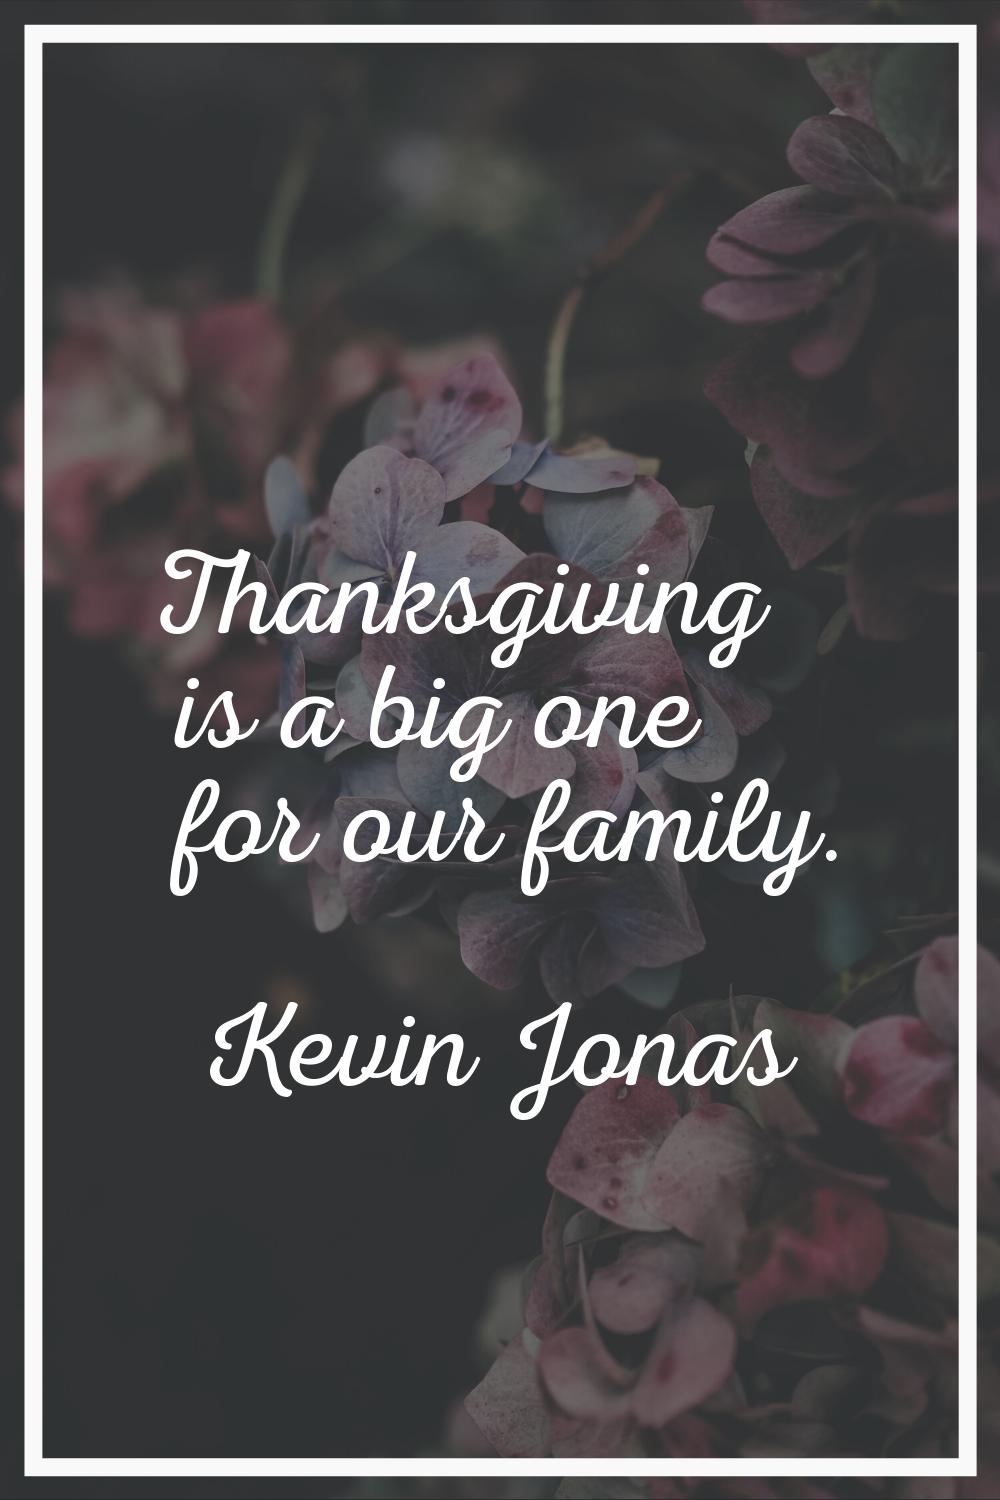 Thanksgiving is a big one for our family.